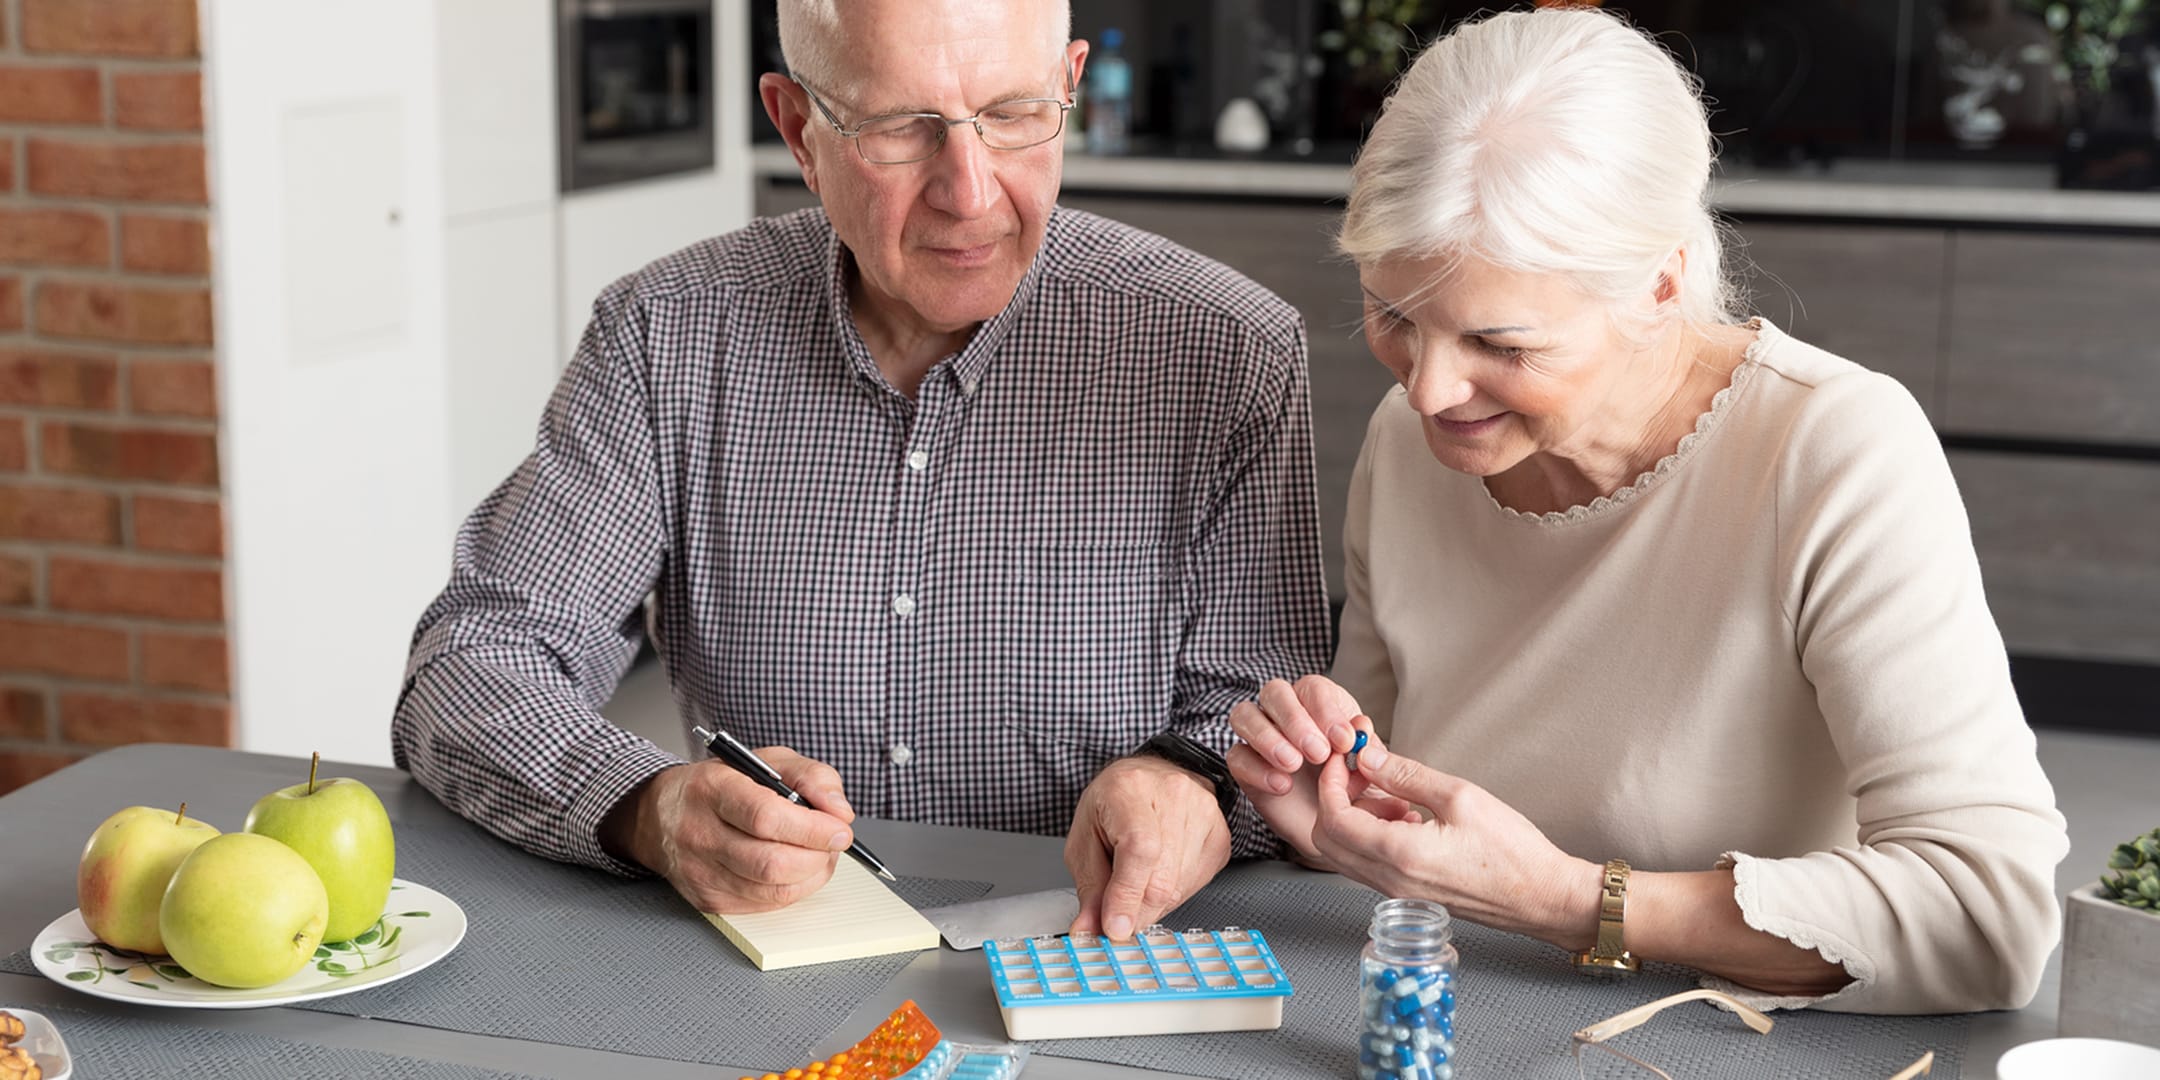 11 Personal Care Products That Make Life Easier at Home for Seniors